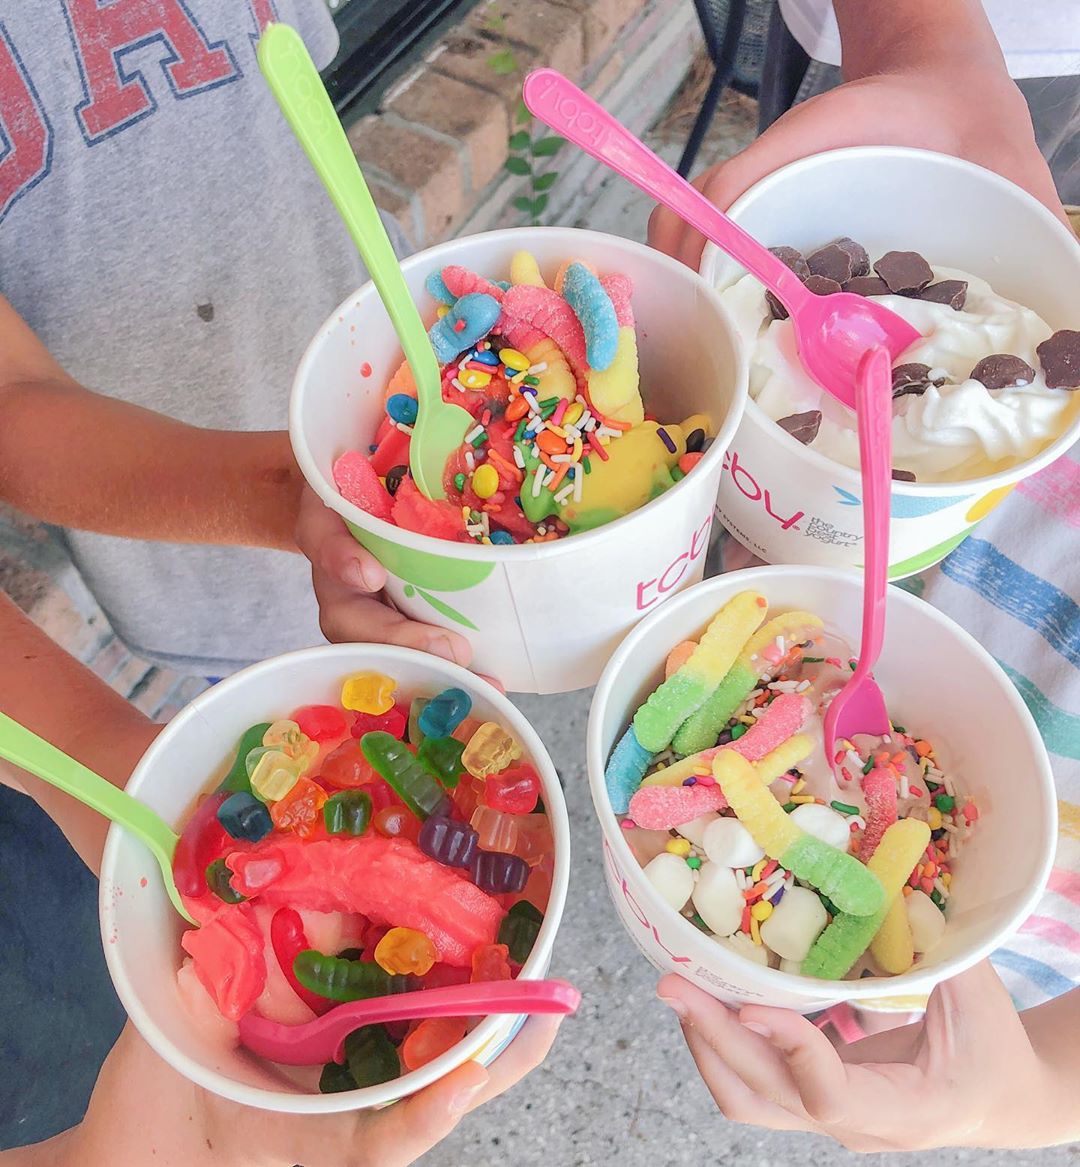 Back to school made sweeter with swirls of #TCBY.🍦 

📸 by angiemizzell (IG) #BackToSchool